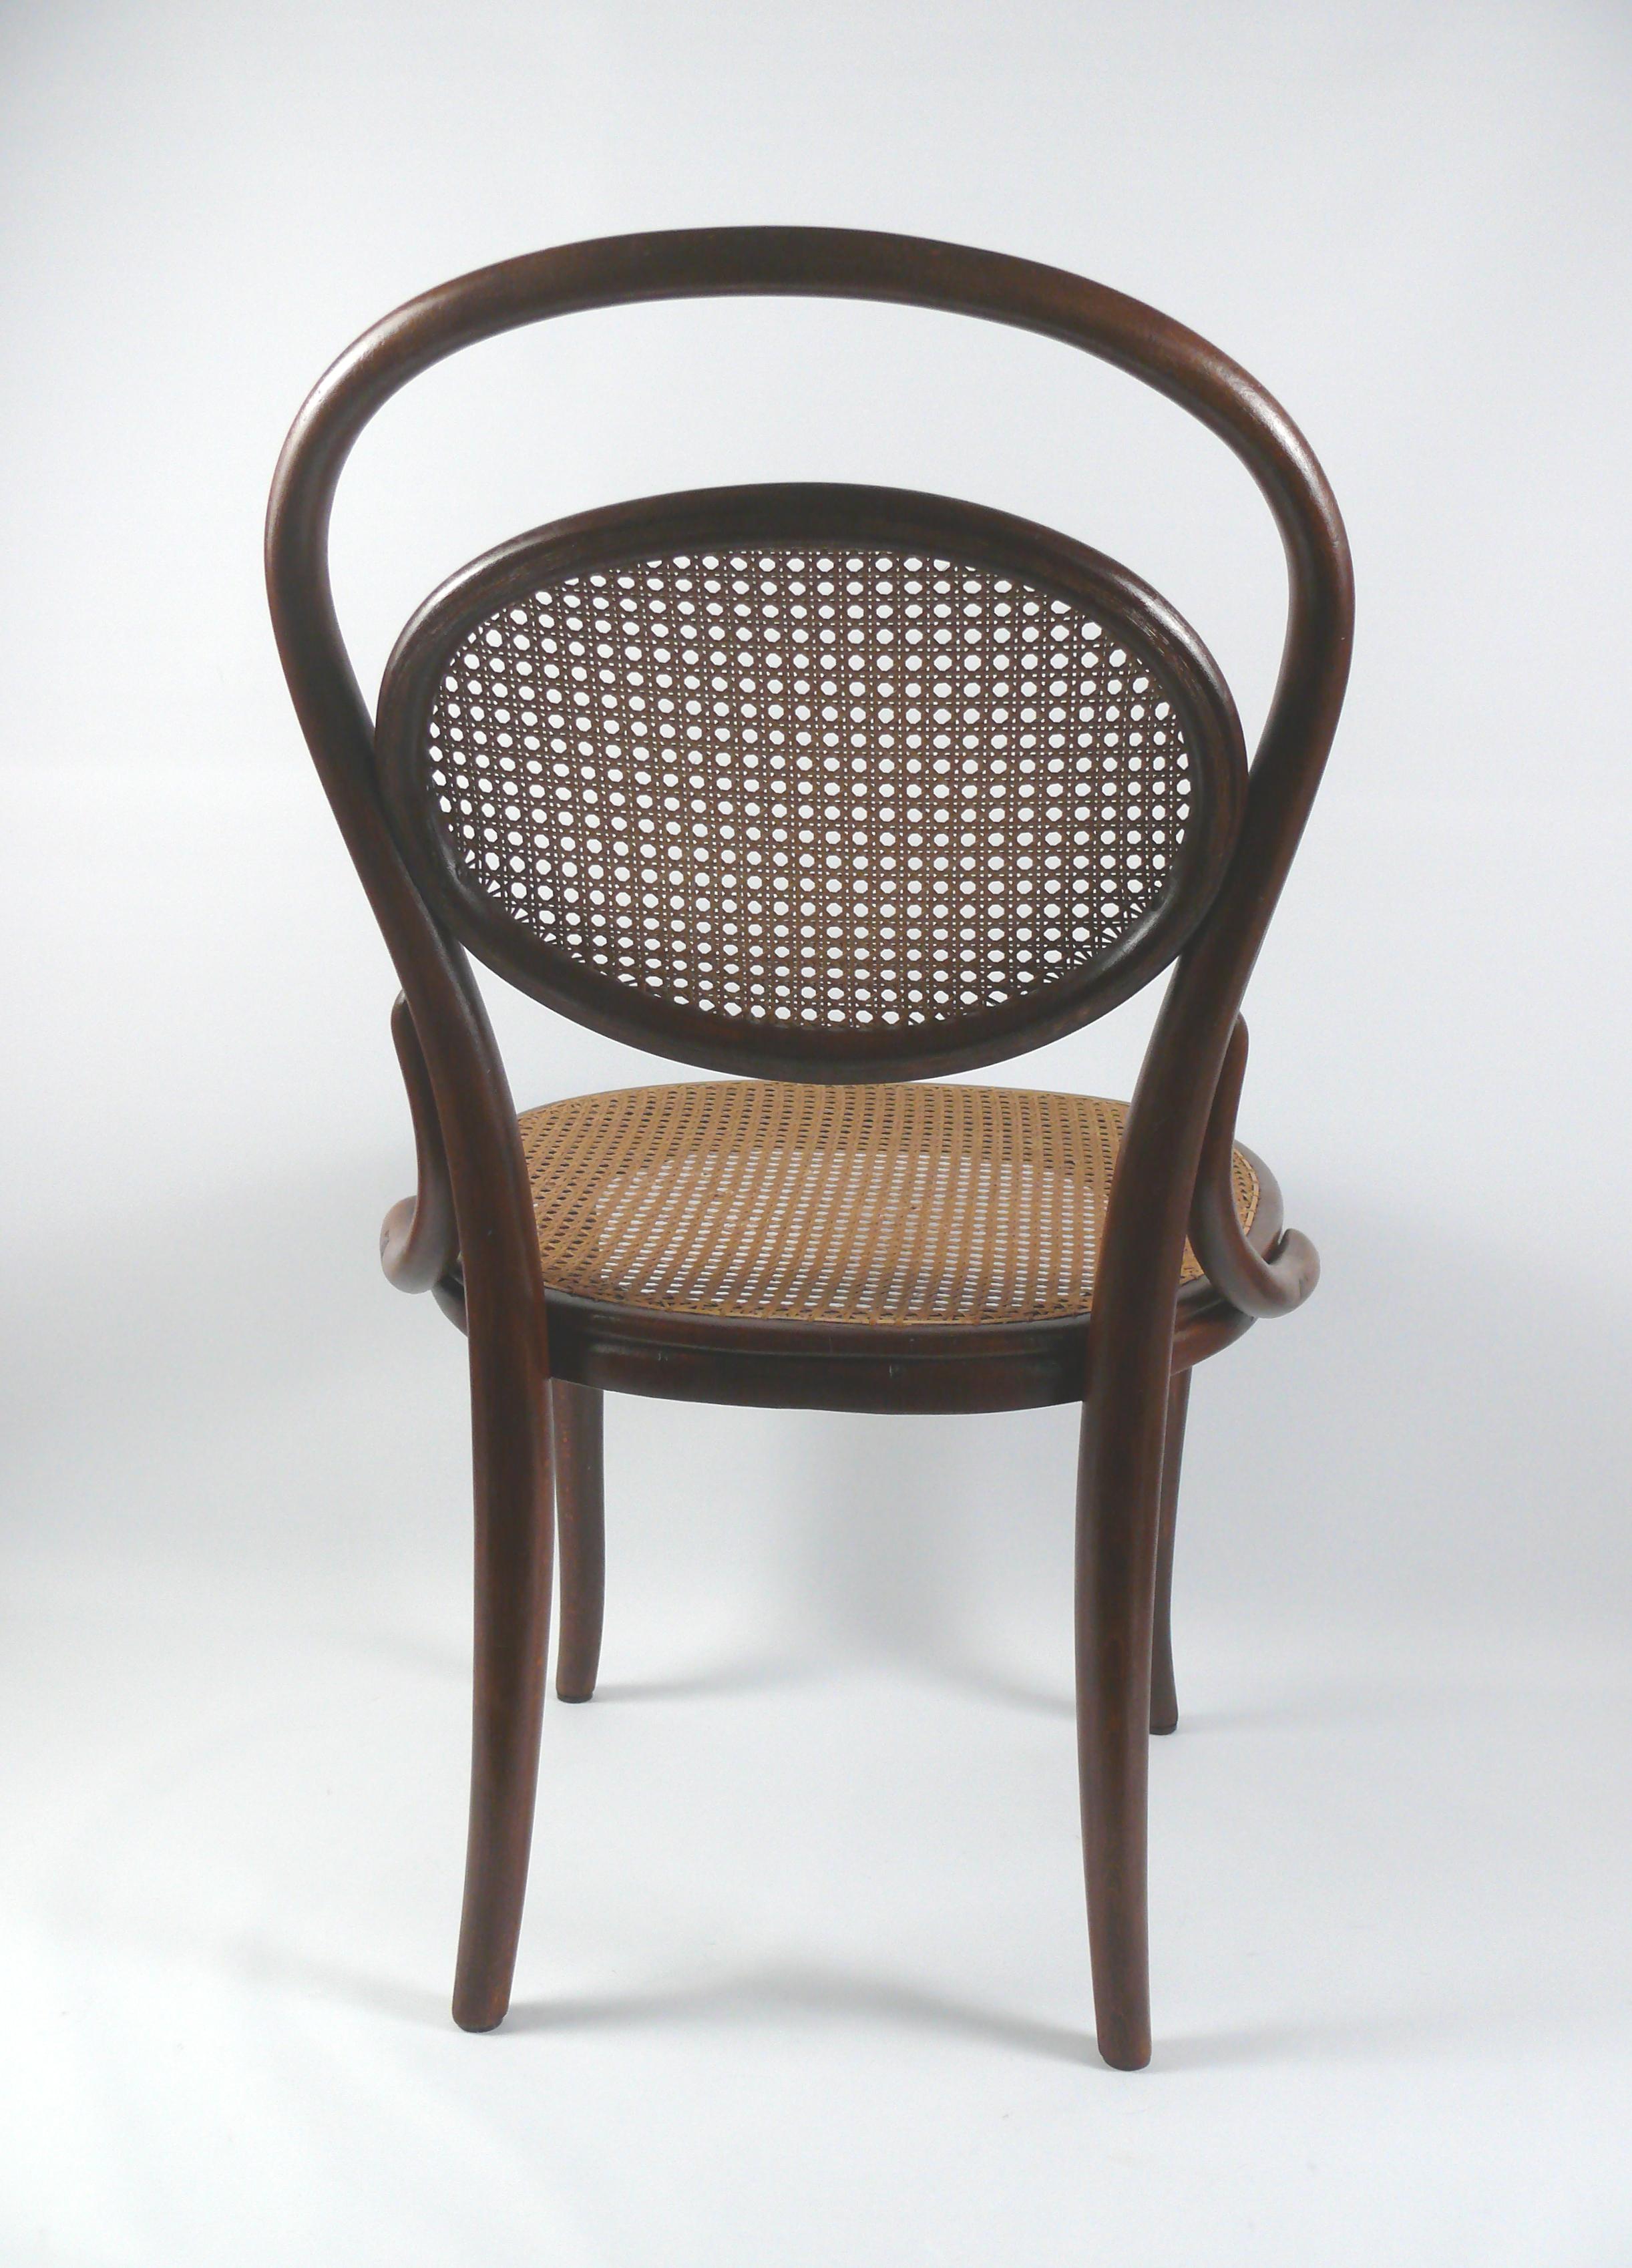 High-quality collector's item: Antique bentwood children chair Nr. 1 from the late 19th century. 
The chair is made of beech wood, screwed together and this chair has the optional reinforcements between the backrest and seat, which you could always